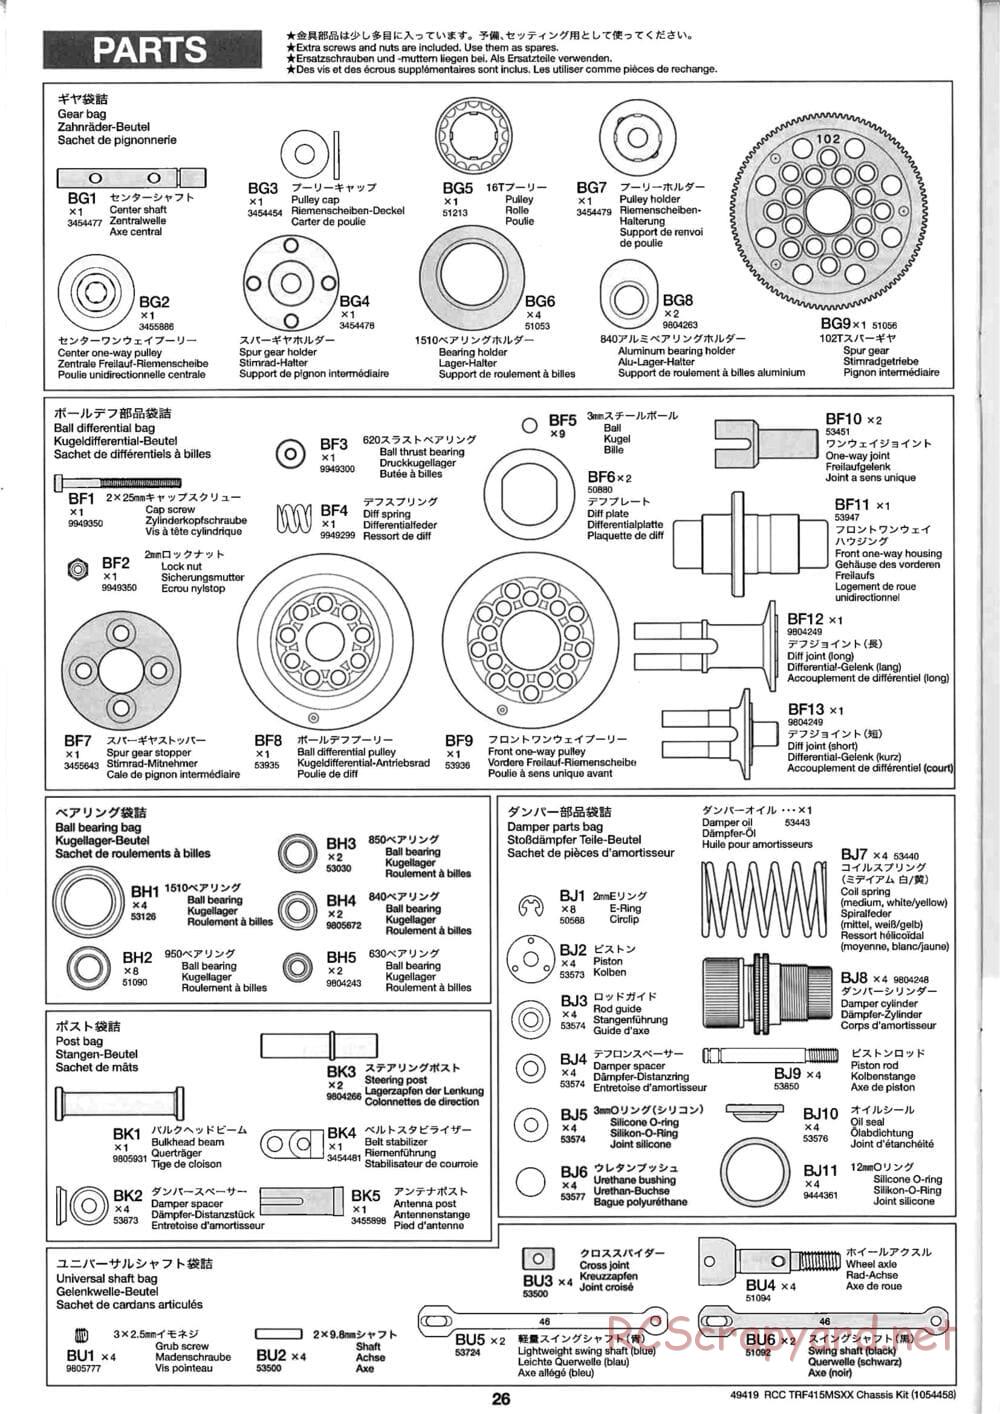 Tamiya - TRF415-MSXX Chassis - Manual - Page 26